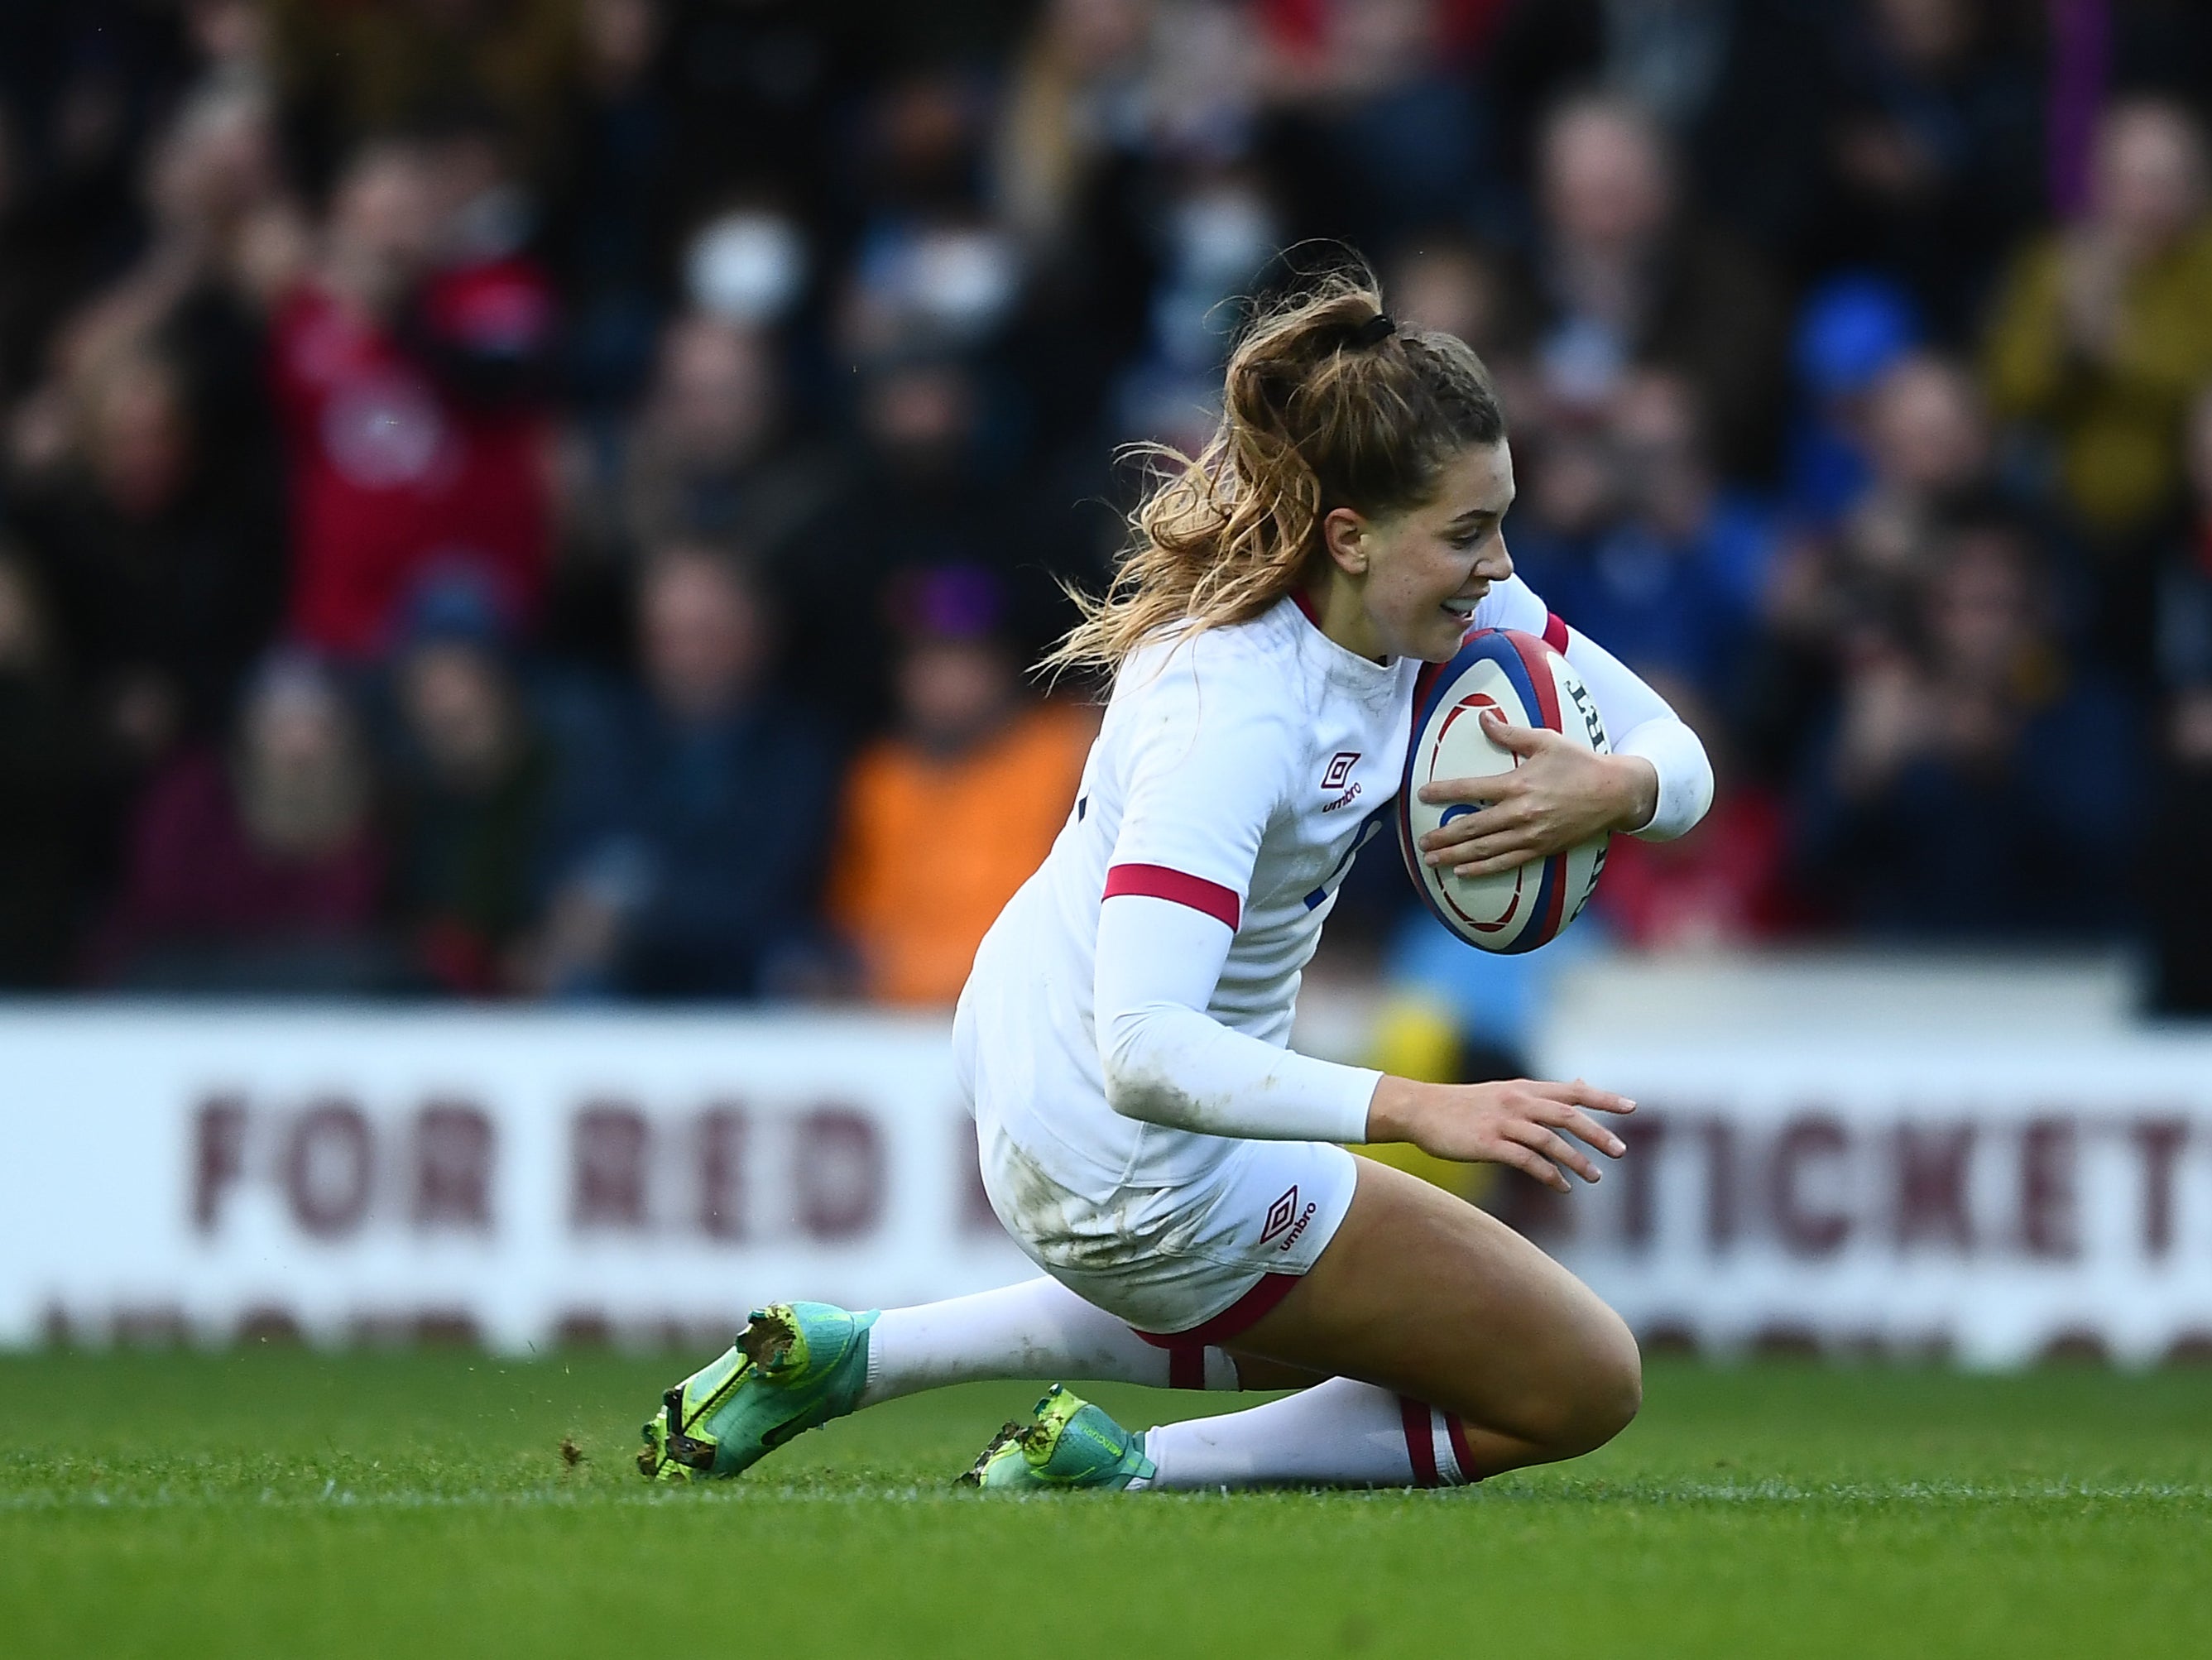 Holly Aitchison will start England’s Women’s Six Nations opener against Scotland at fly-half